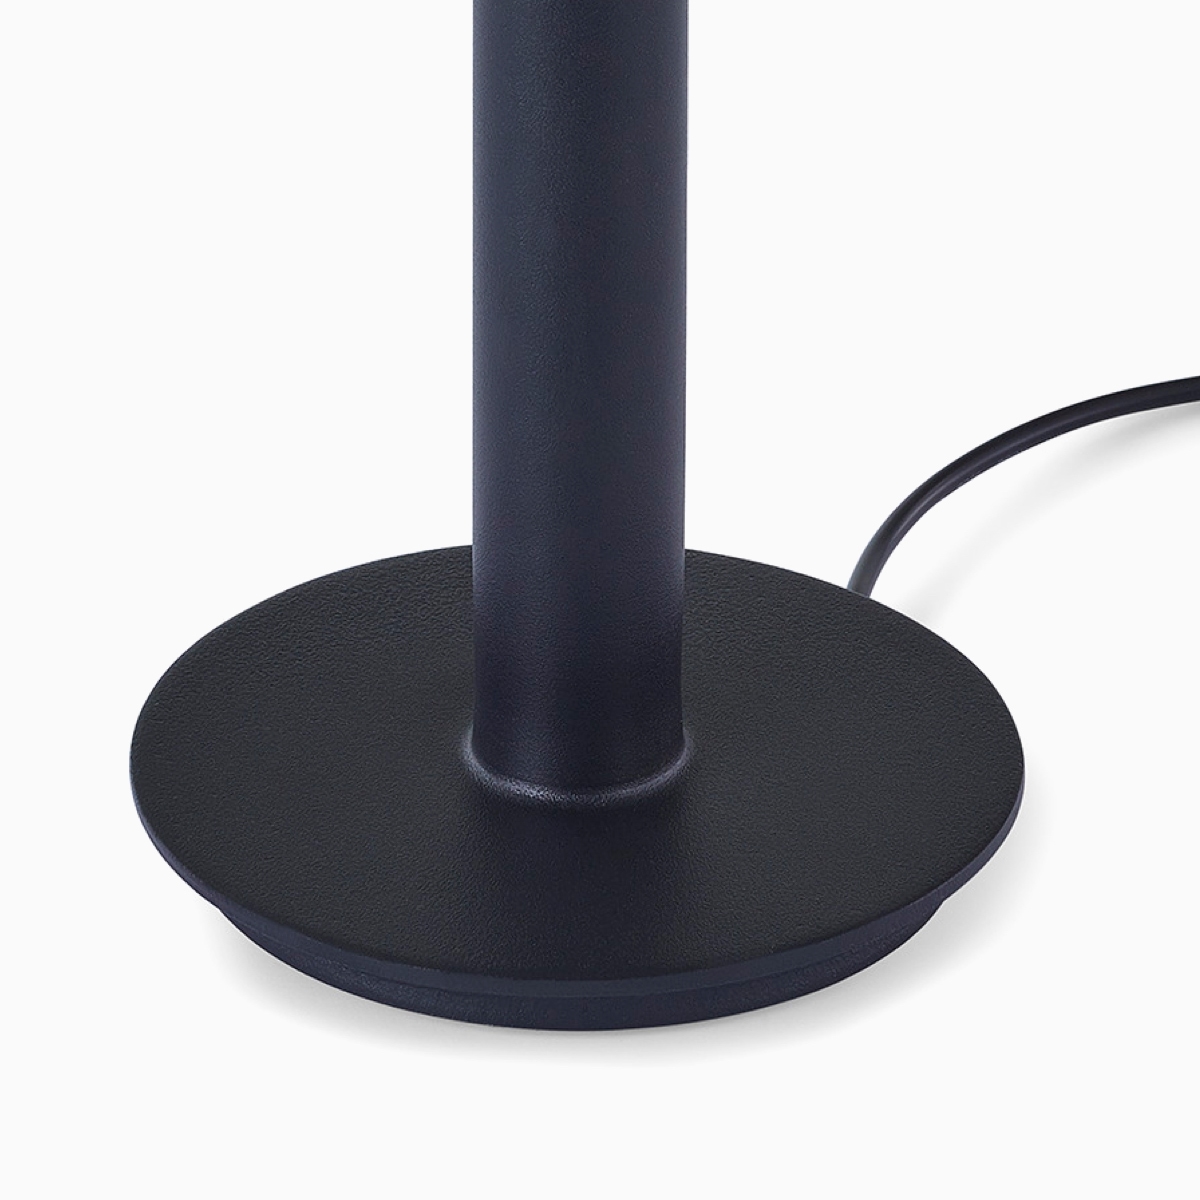 A close-up view a black Logic Micro Tower's base with its power cord partially wrapped around it.